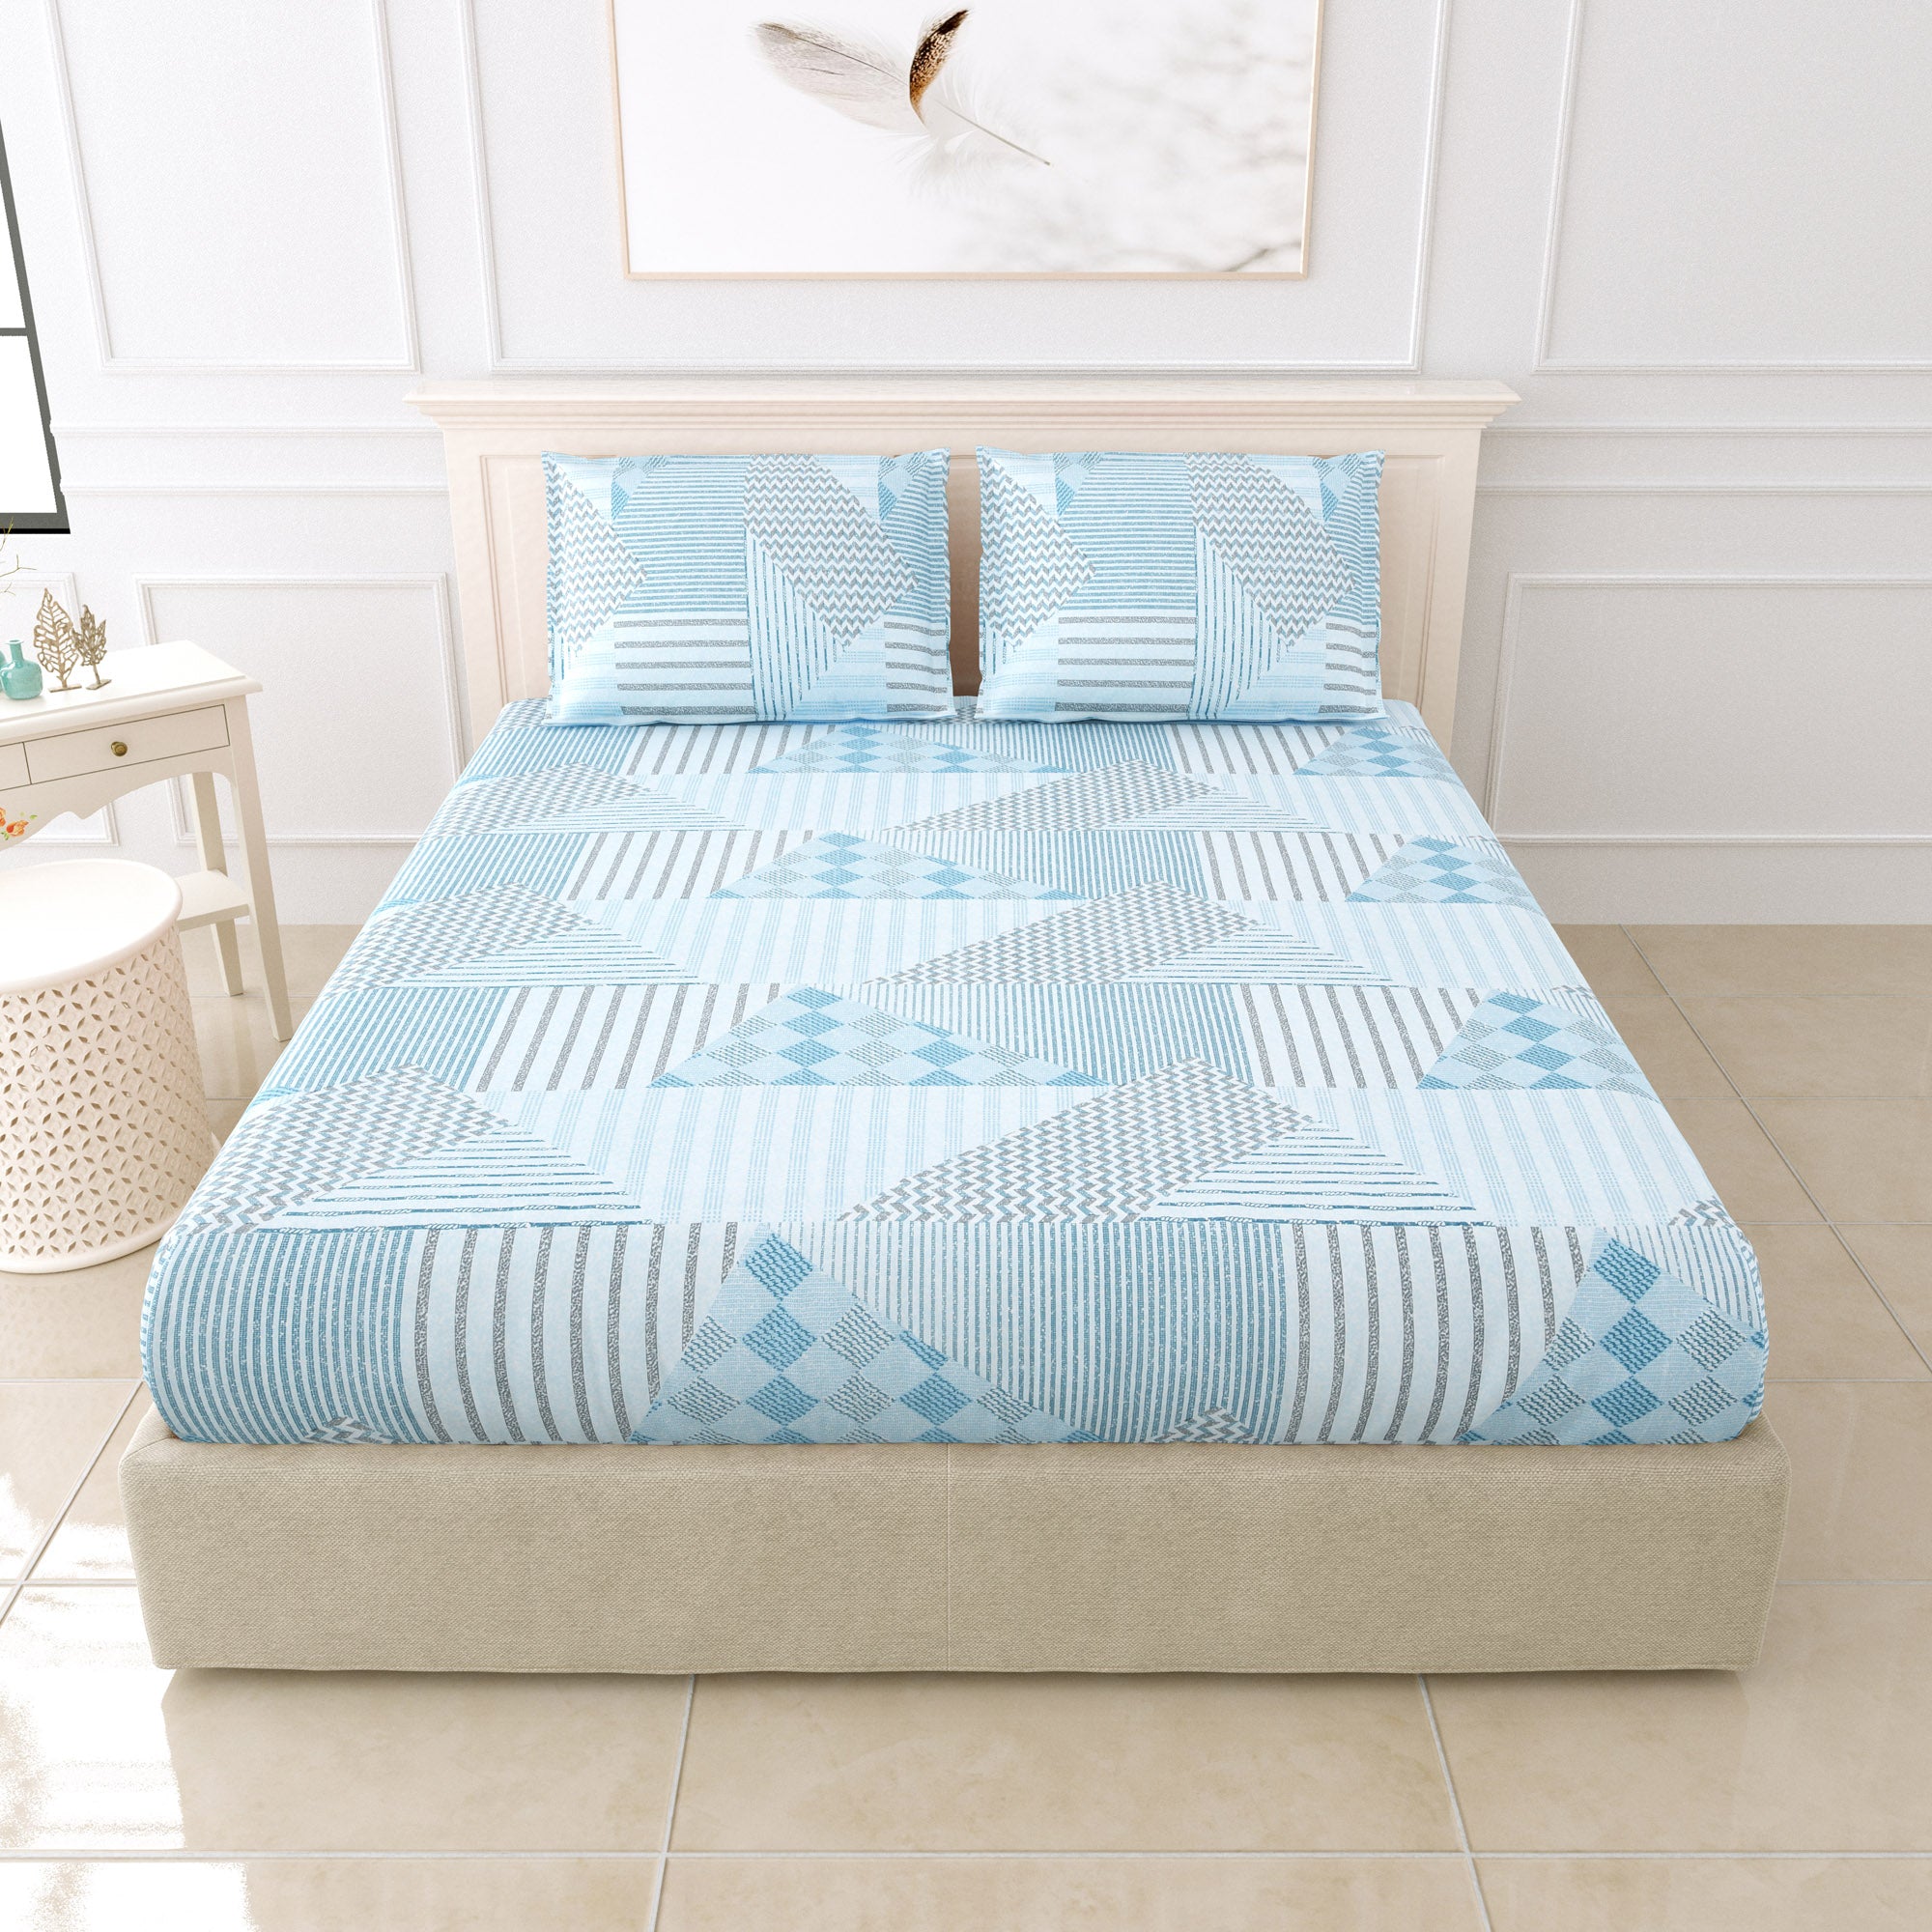 eCraftIndia 250 TC Blue, White Zig Zag Lines Printed Cotton Double Bedsheet With 2 Pillow Covers